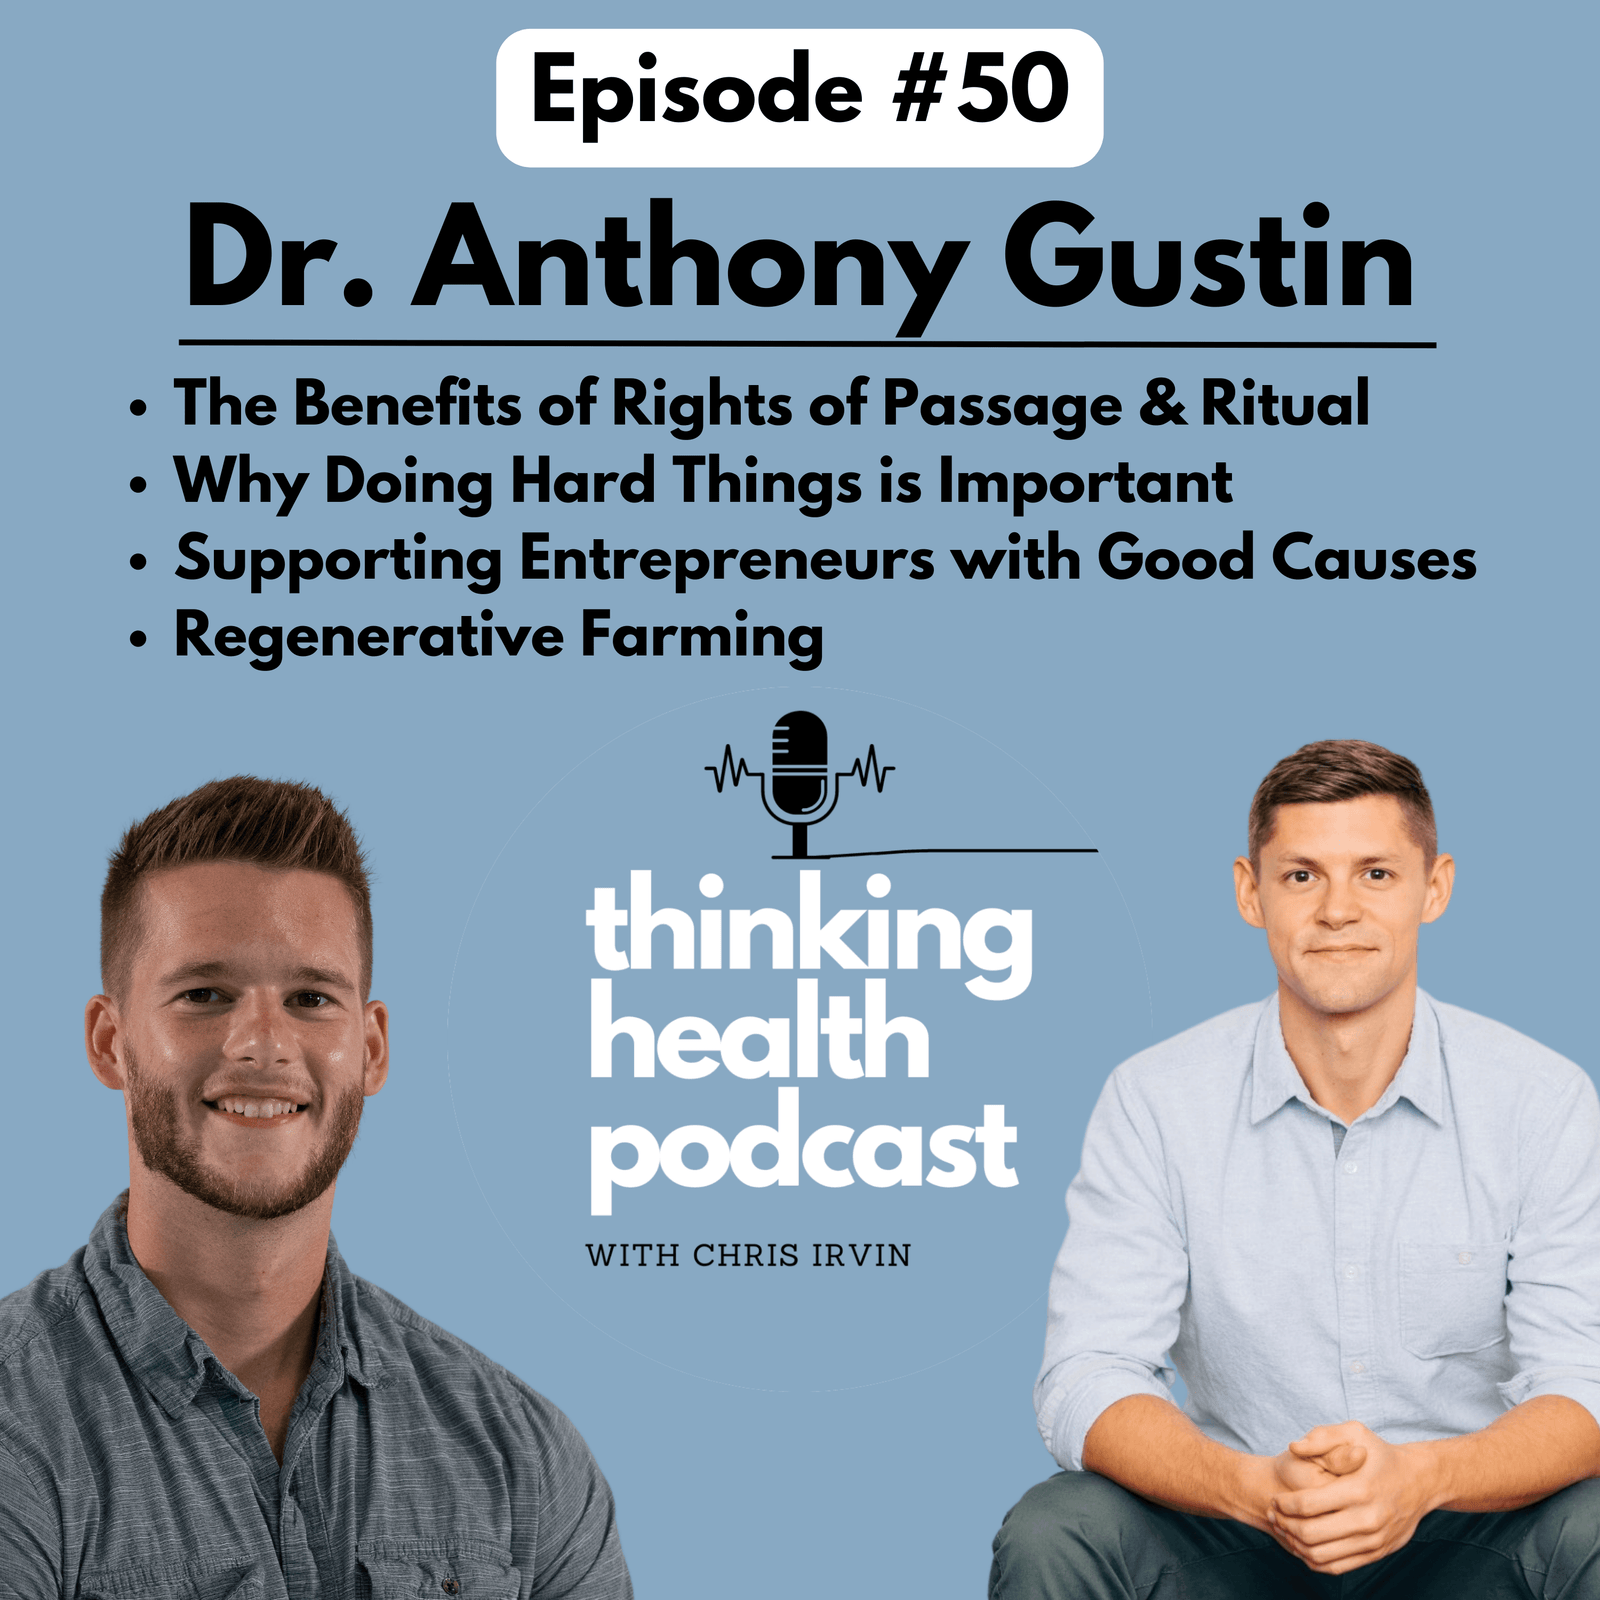 Episode #50: Dr. Anthony Gustin: Rituals & Rights of Passage, Doing Hard Things, Personal Fulfillment, Regenerative Agriculture - BioCoach